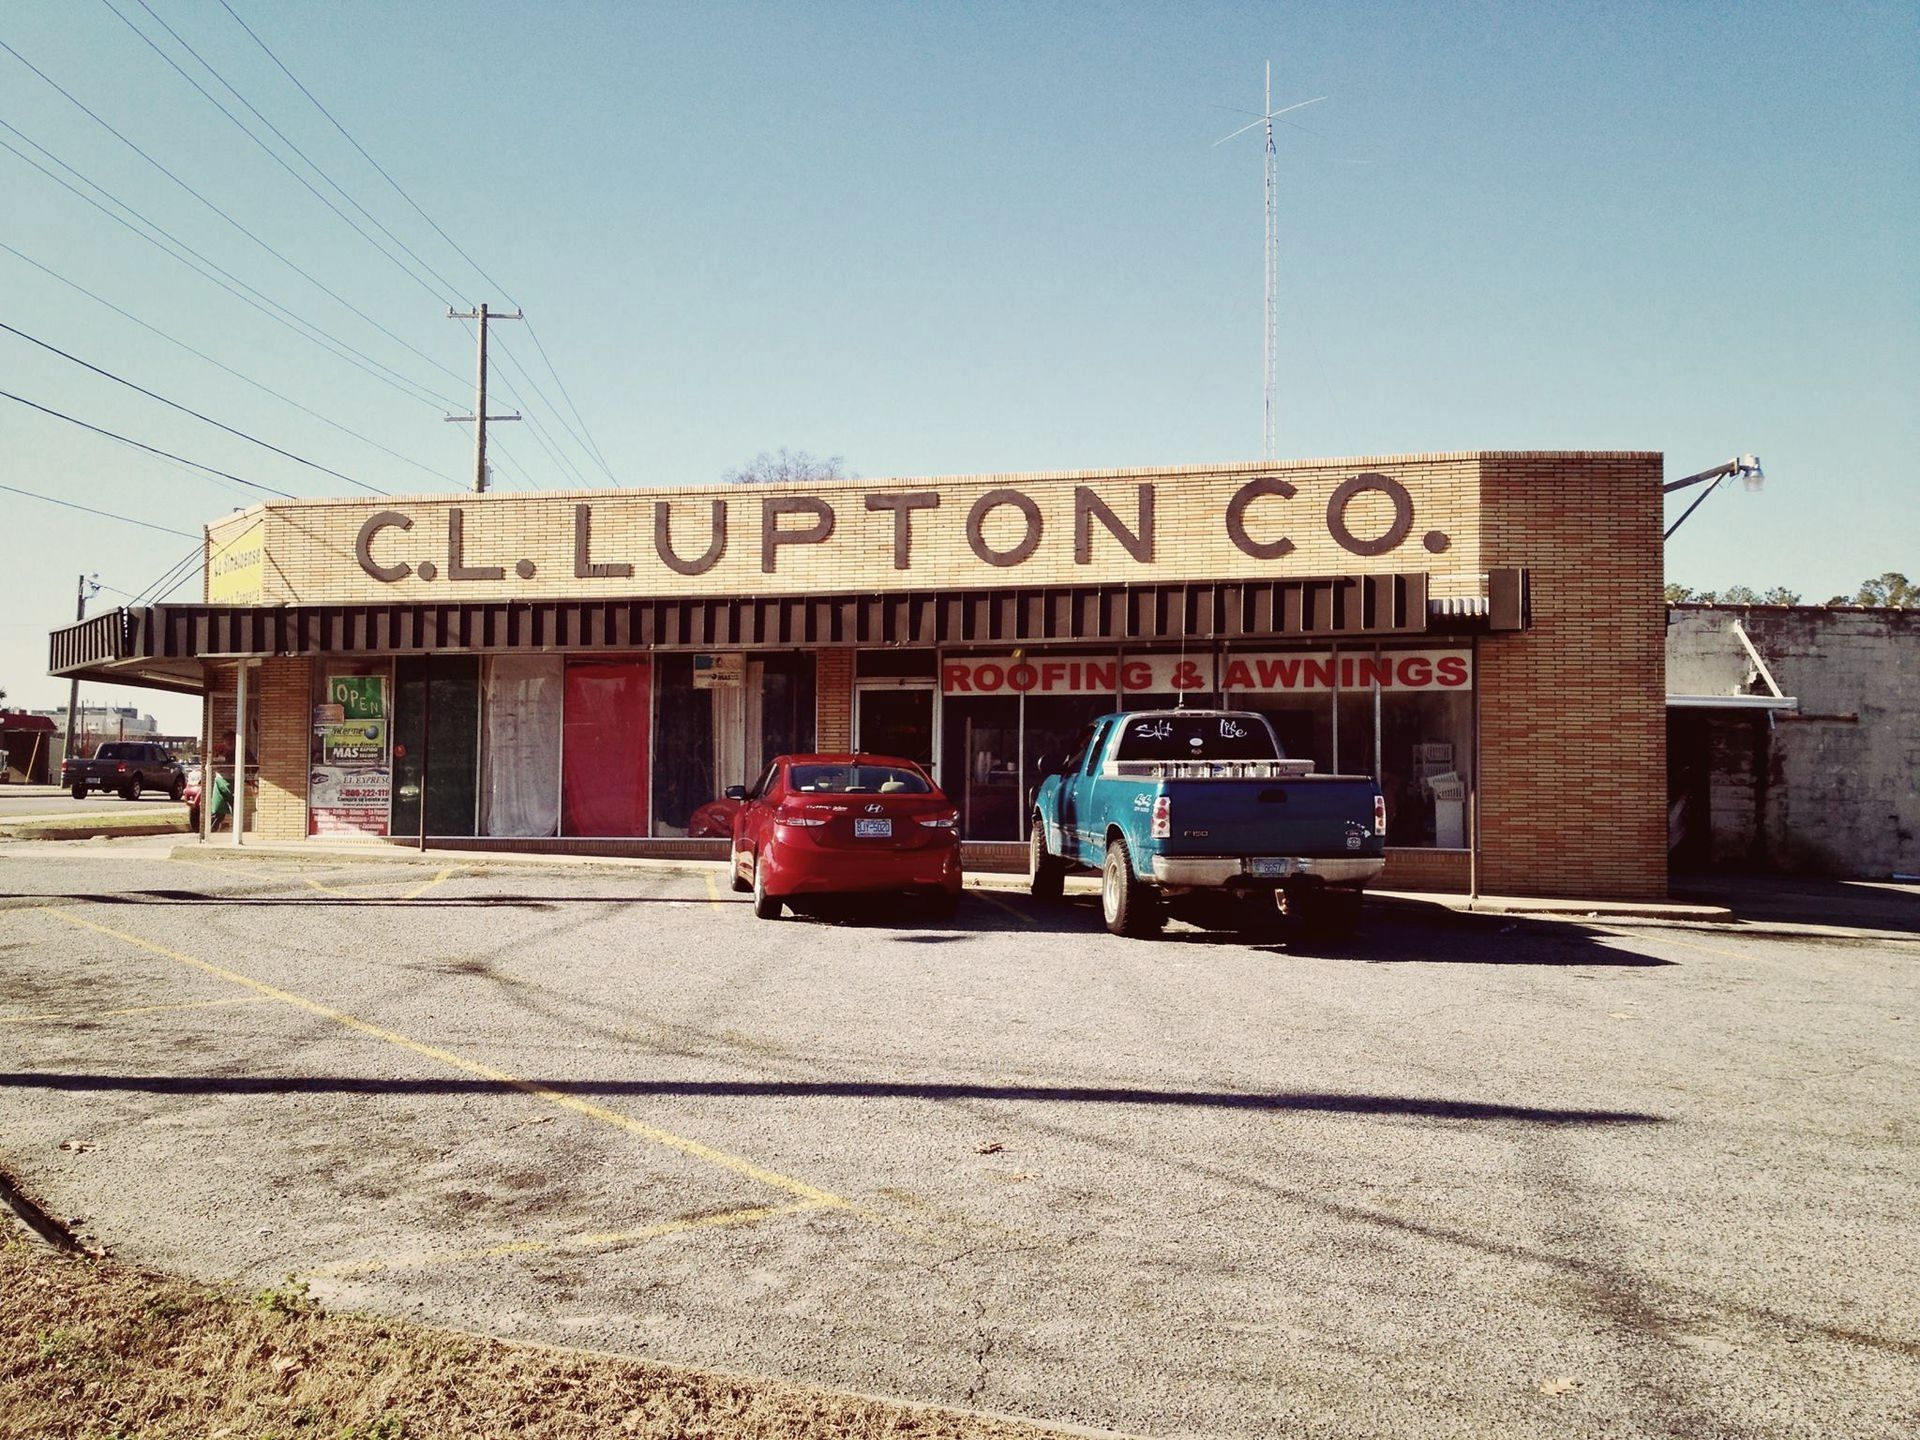 two cars are parked in front of a building that says c.l. lupton co.